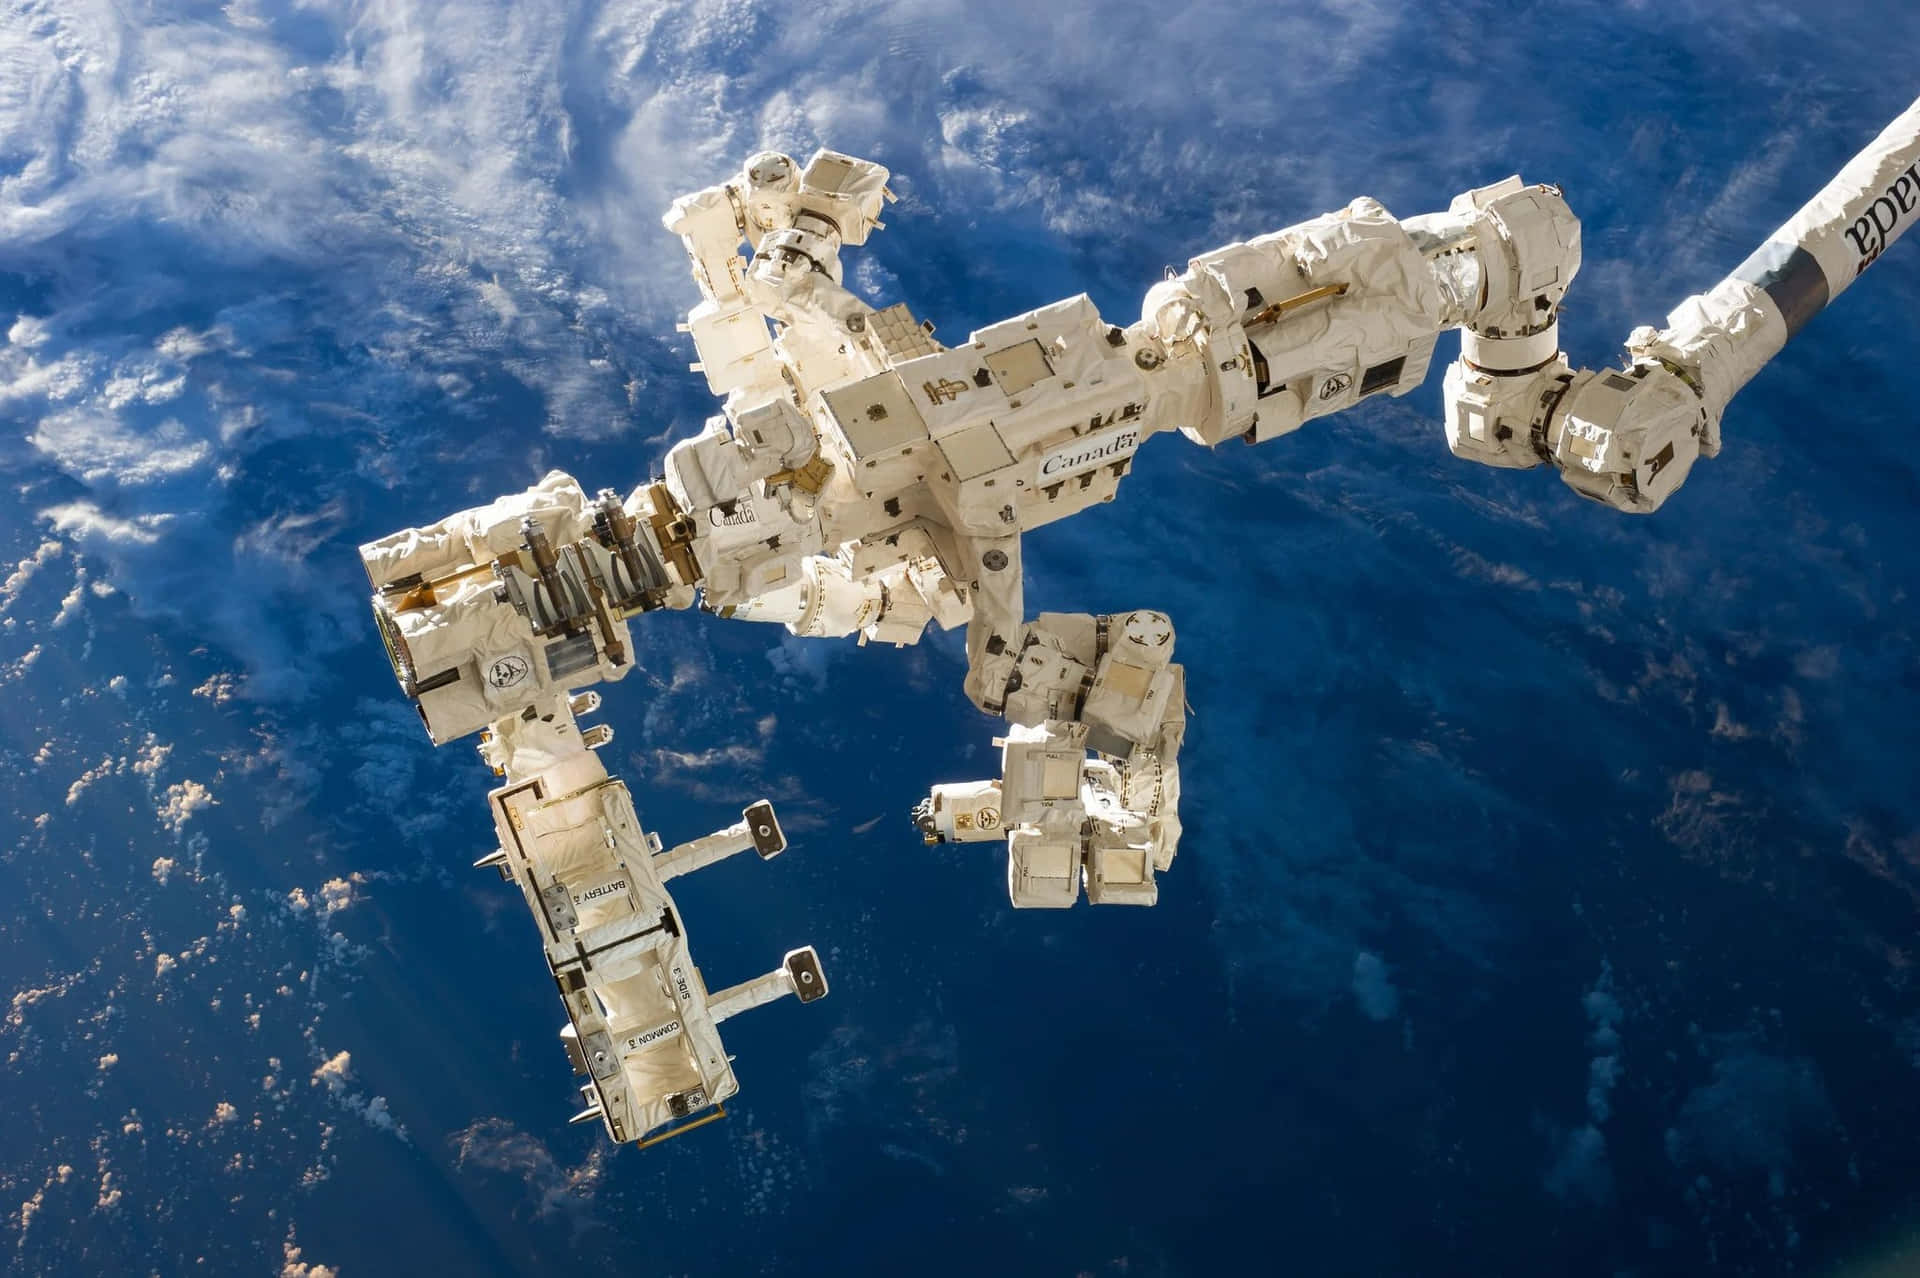 Stunning view of a space station orbiting Earth. Wallpaper